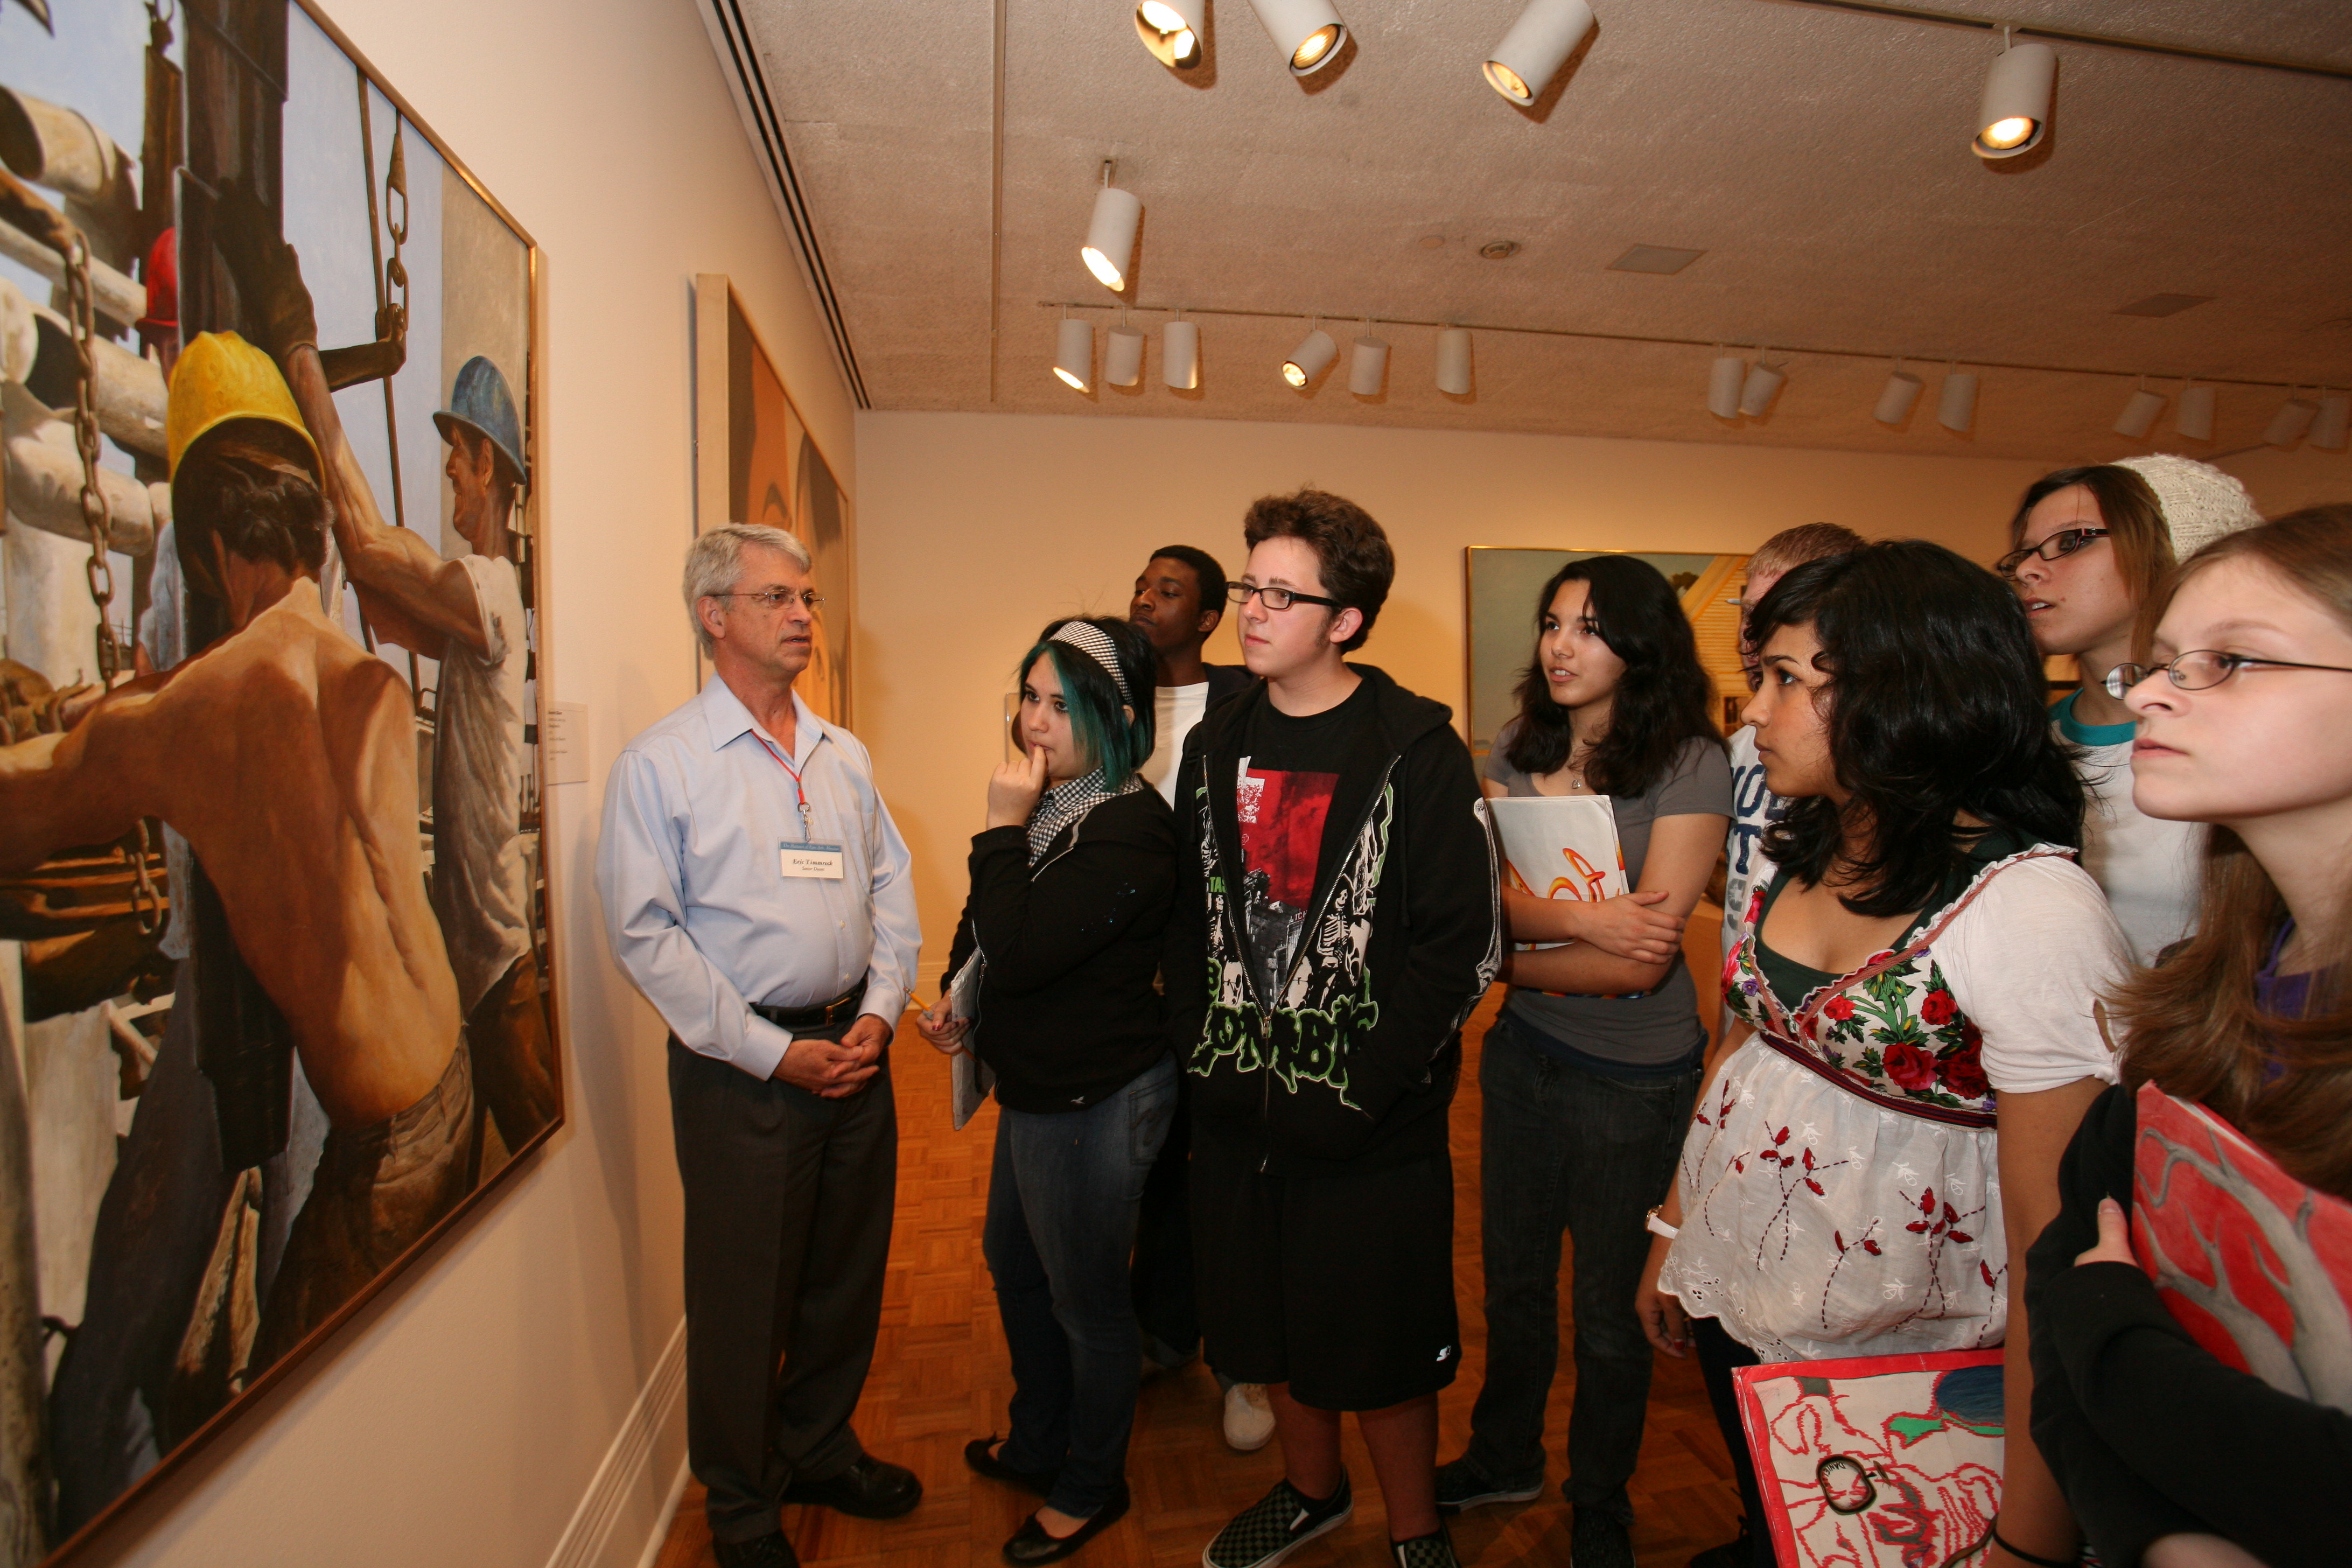 MFAH_ Senior Docent Eric Timmreck; Courtesy of the Museum of Fine Arts, Houston